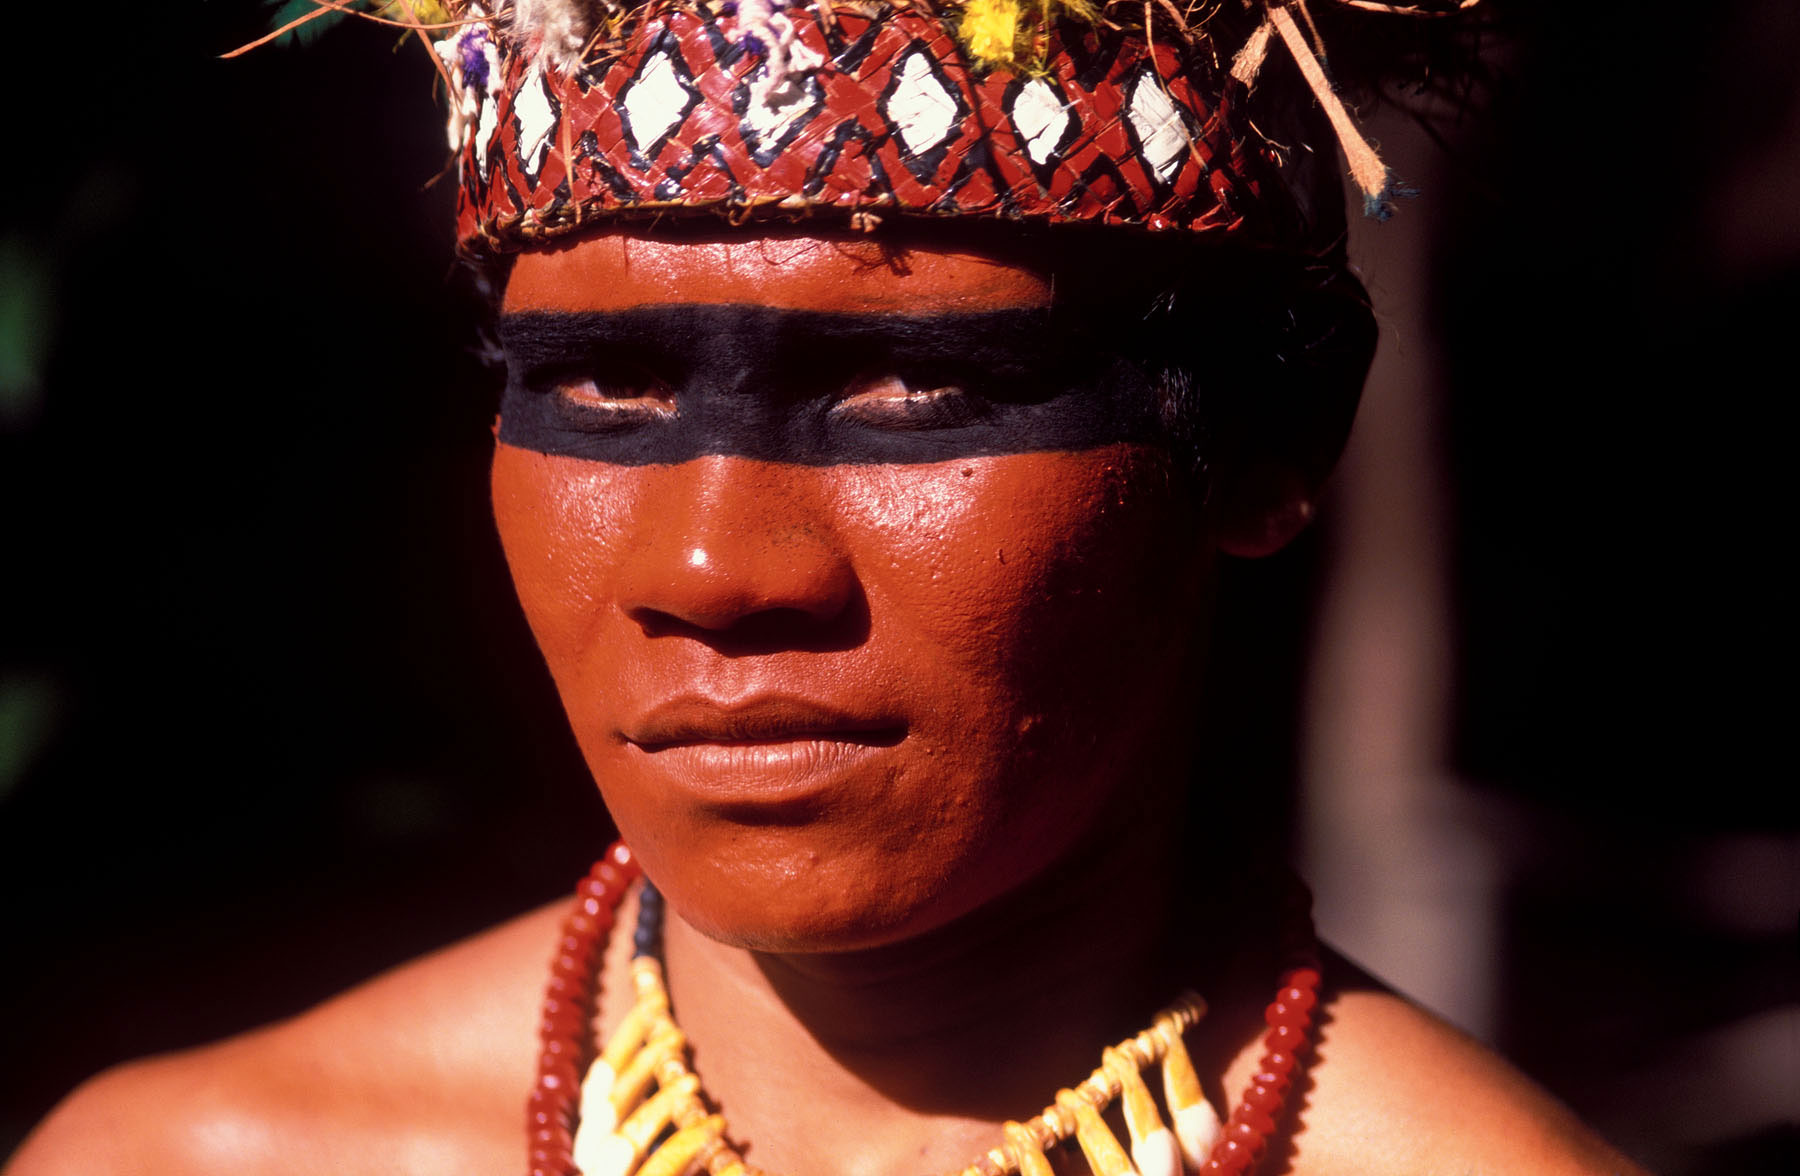 Indigenous Tribes